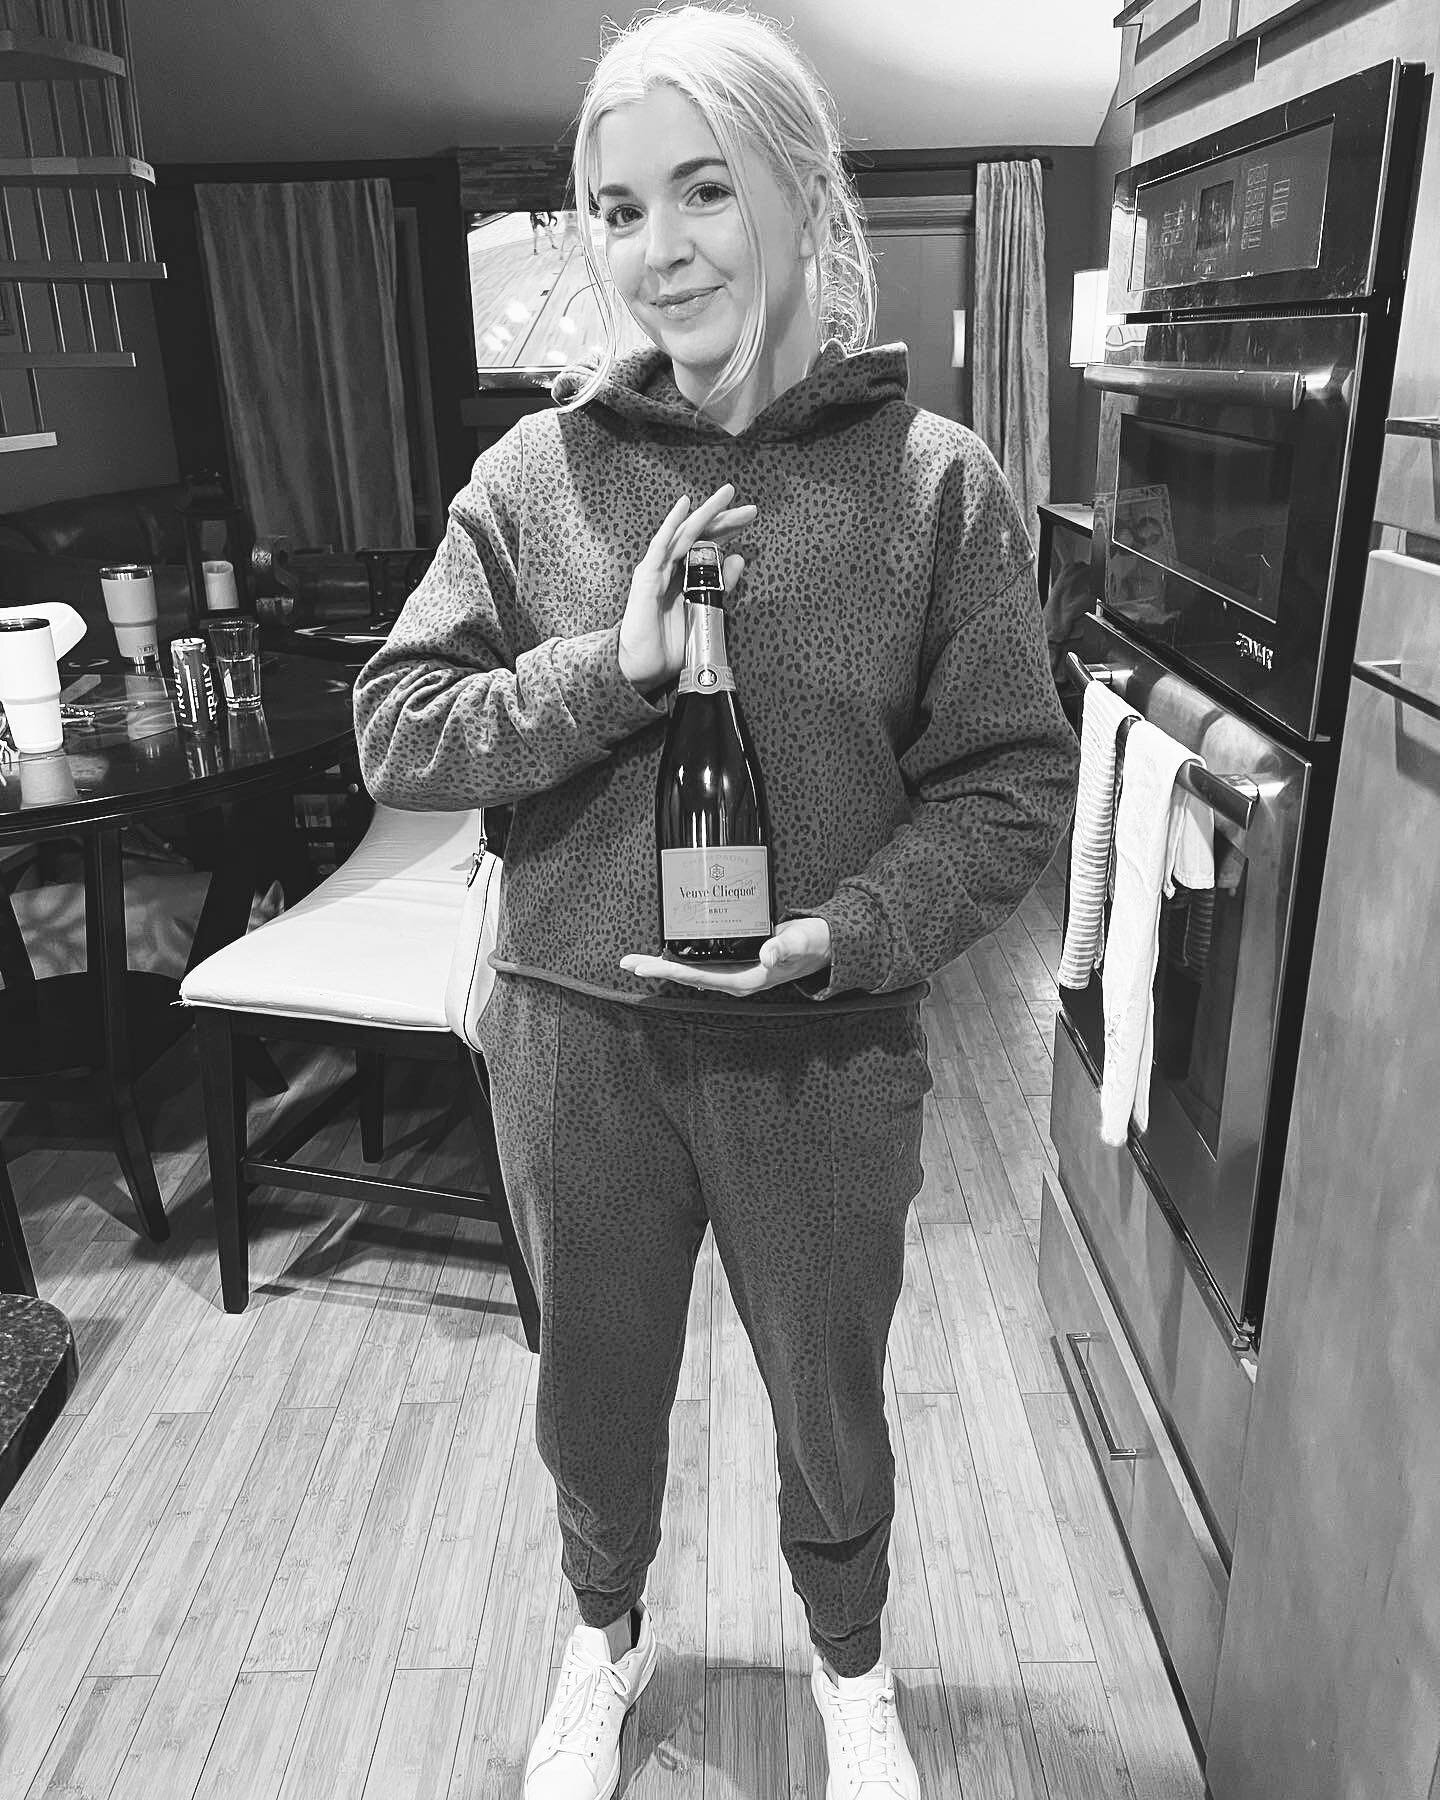 CHEEEEERS TO NEW ADVENTURES 🍾🥂🎉 

Could write like 8 blog posts about the past several weeks, but I&rsquo;ll be doing good to knock out 1, SOOO:

Stay tuned or whateverrrr 😂

PS Is it tacky to take pics with the Veuve? IDK but TY for the champs, 